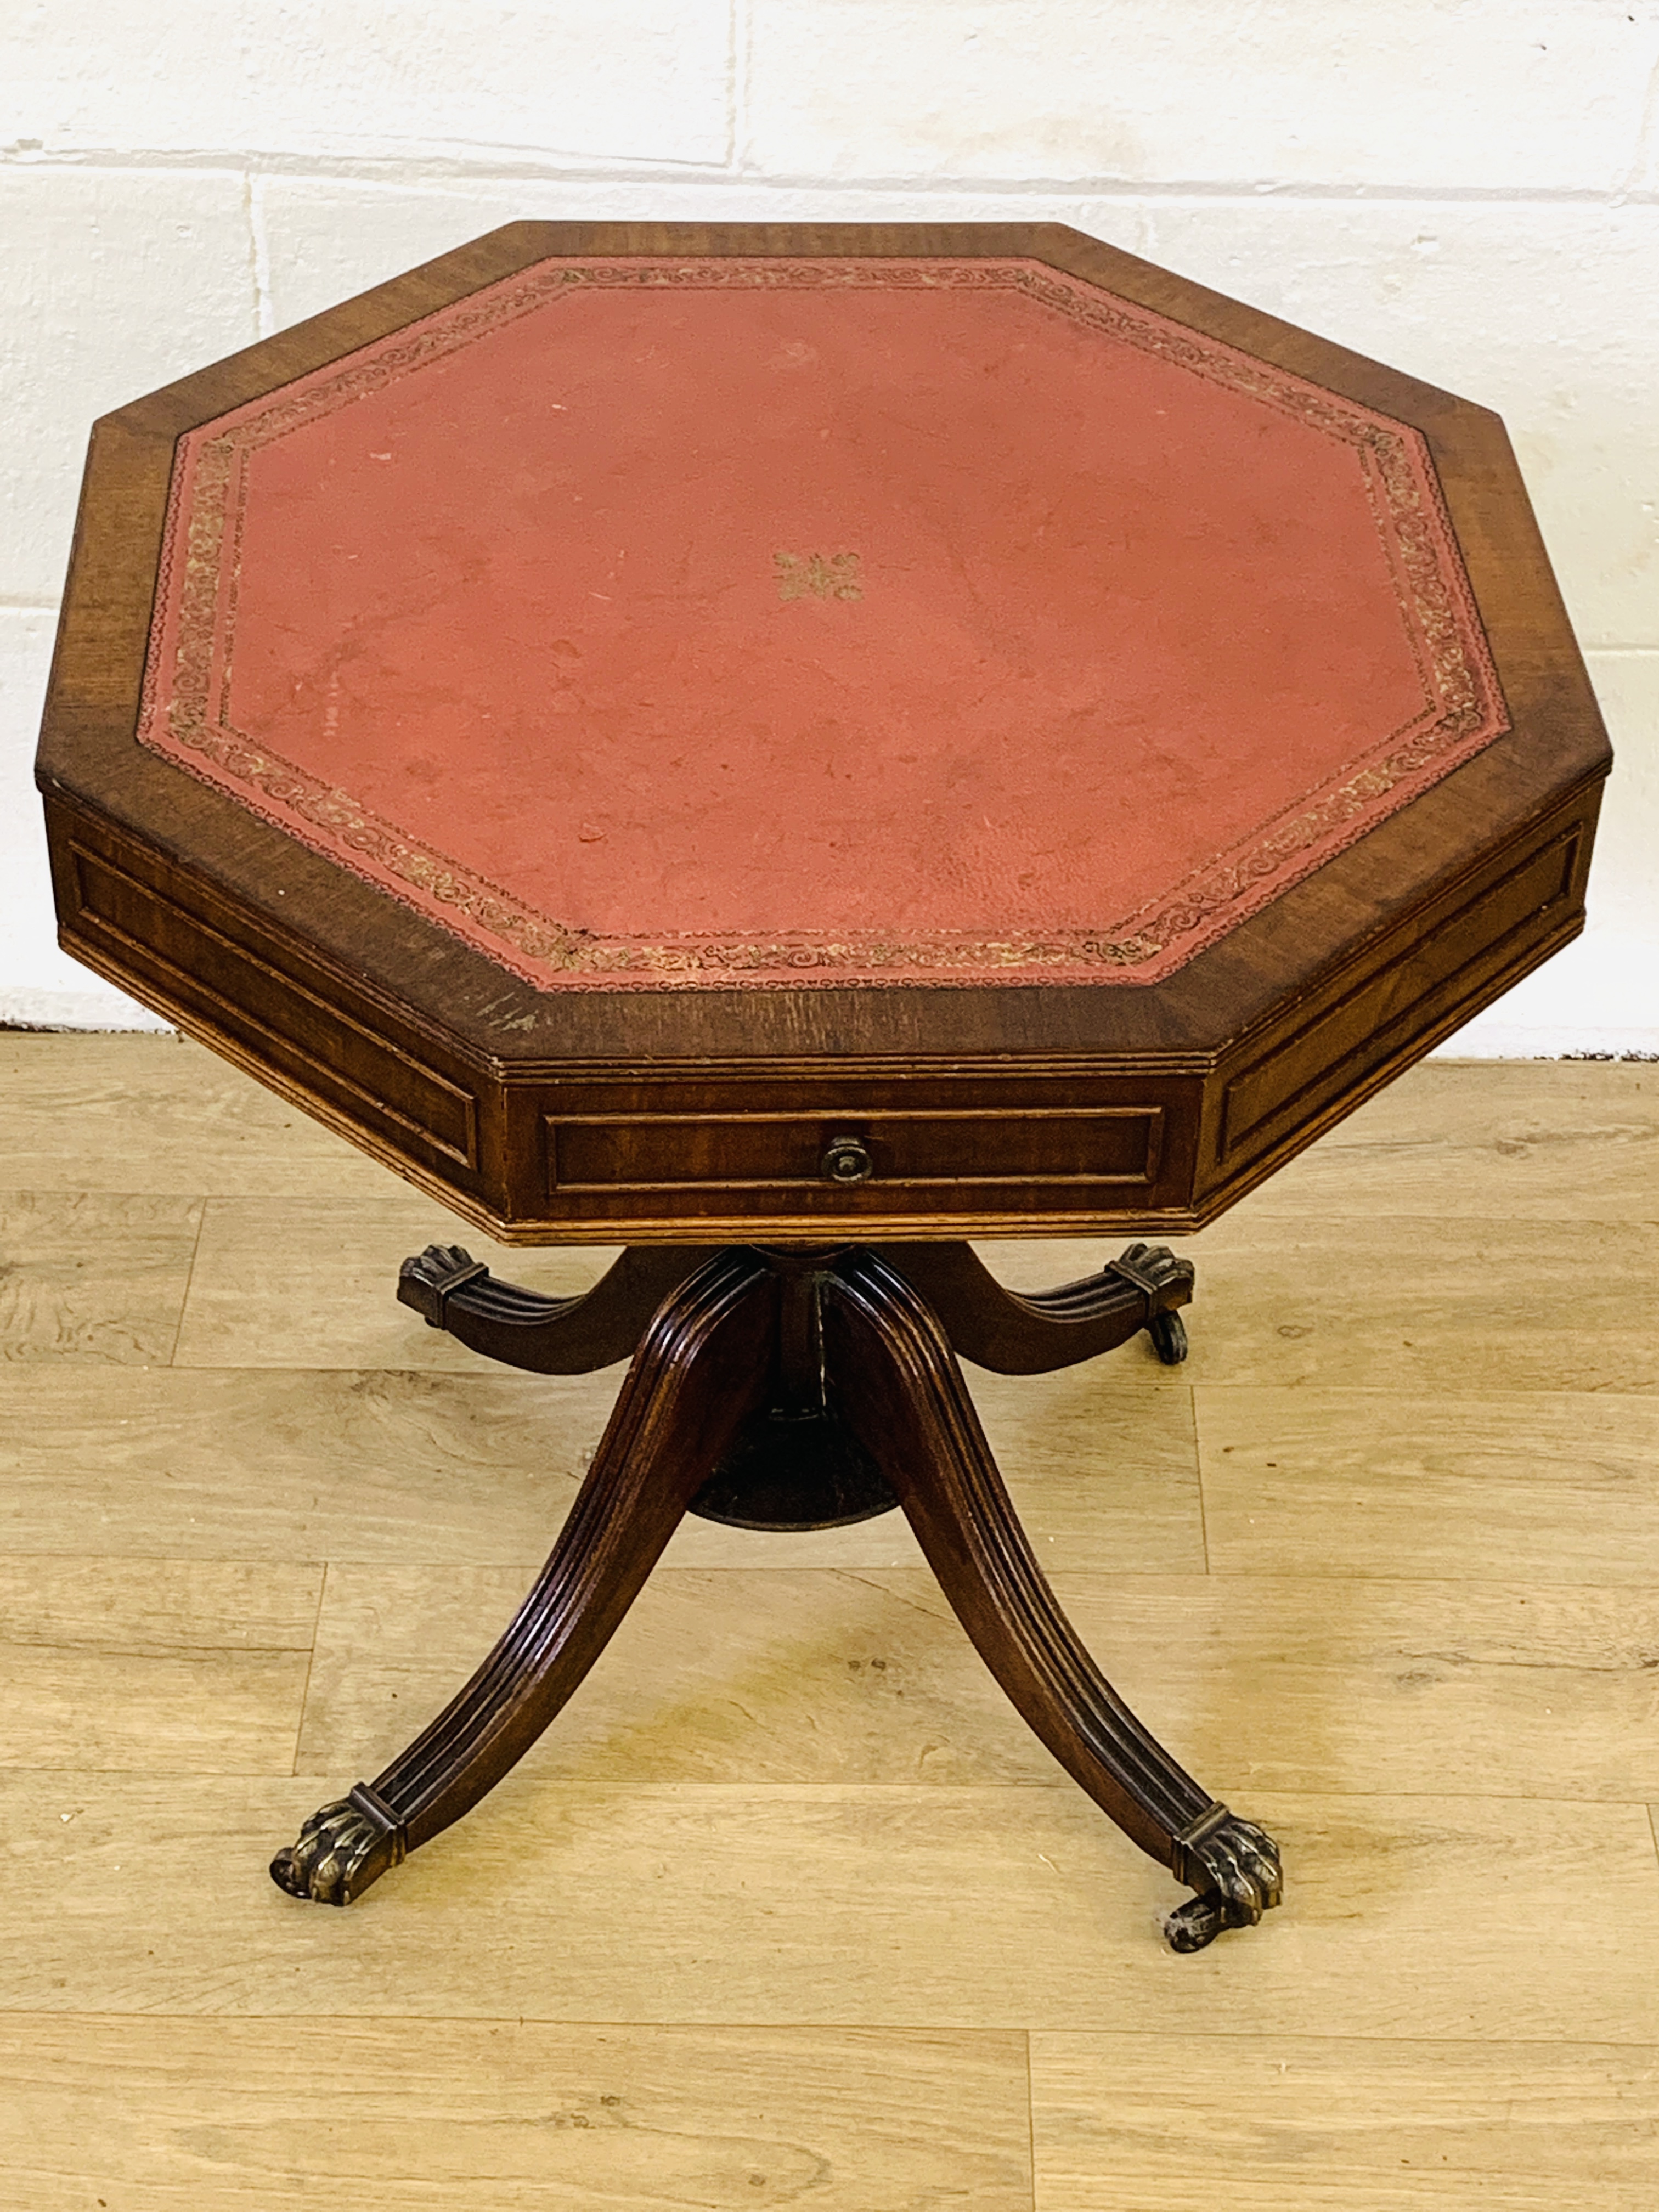 Octagonal drum table - Image 3 of 4